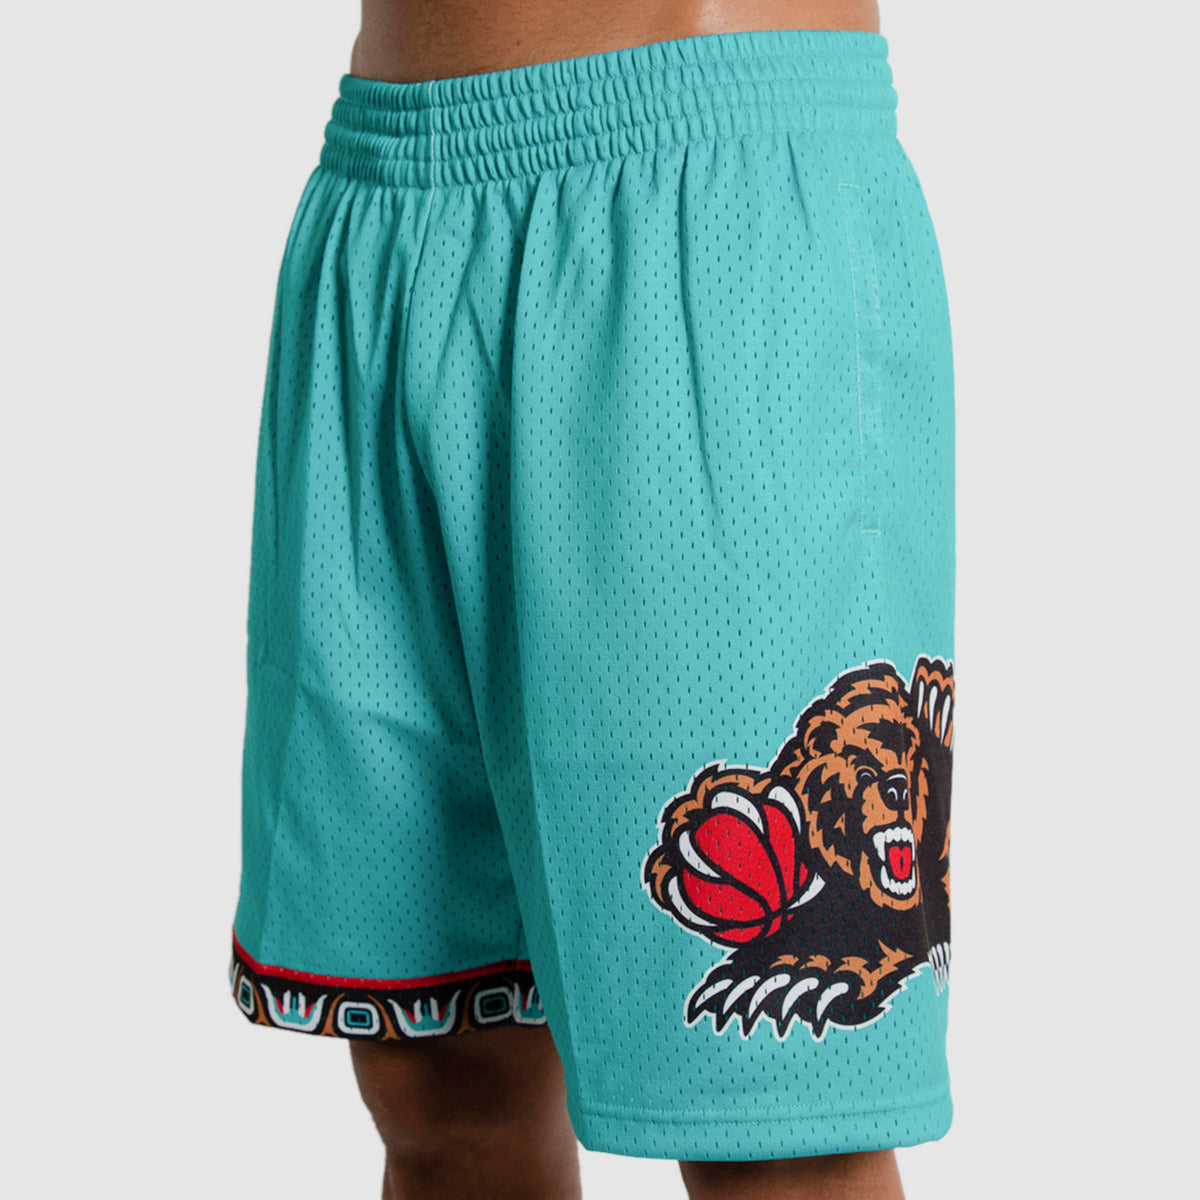 Youth Mitchell & Ness Teal Vancouver Grizzlies Hardwood Classics Swingman Shorts